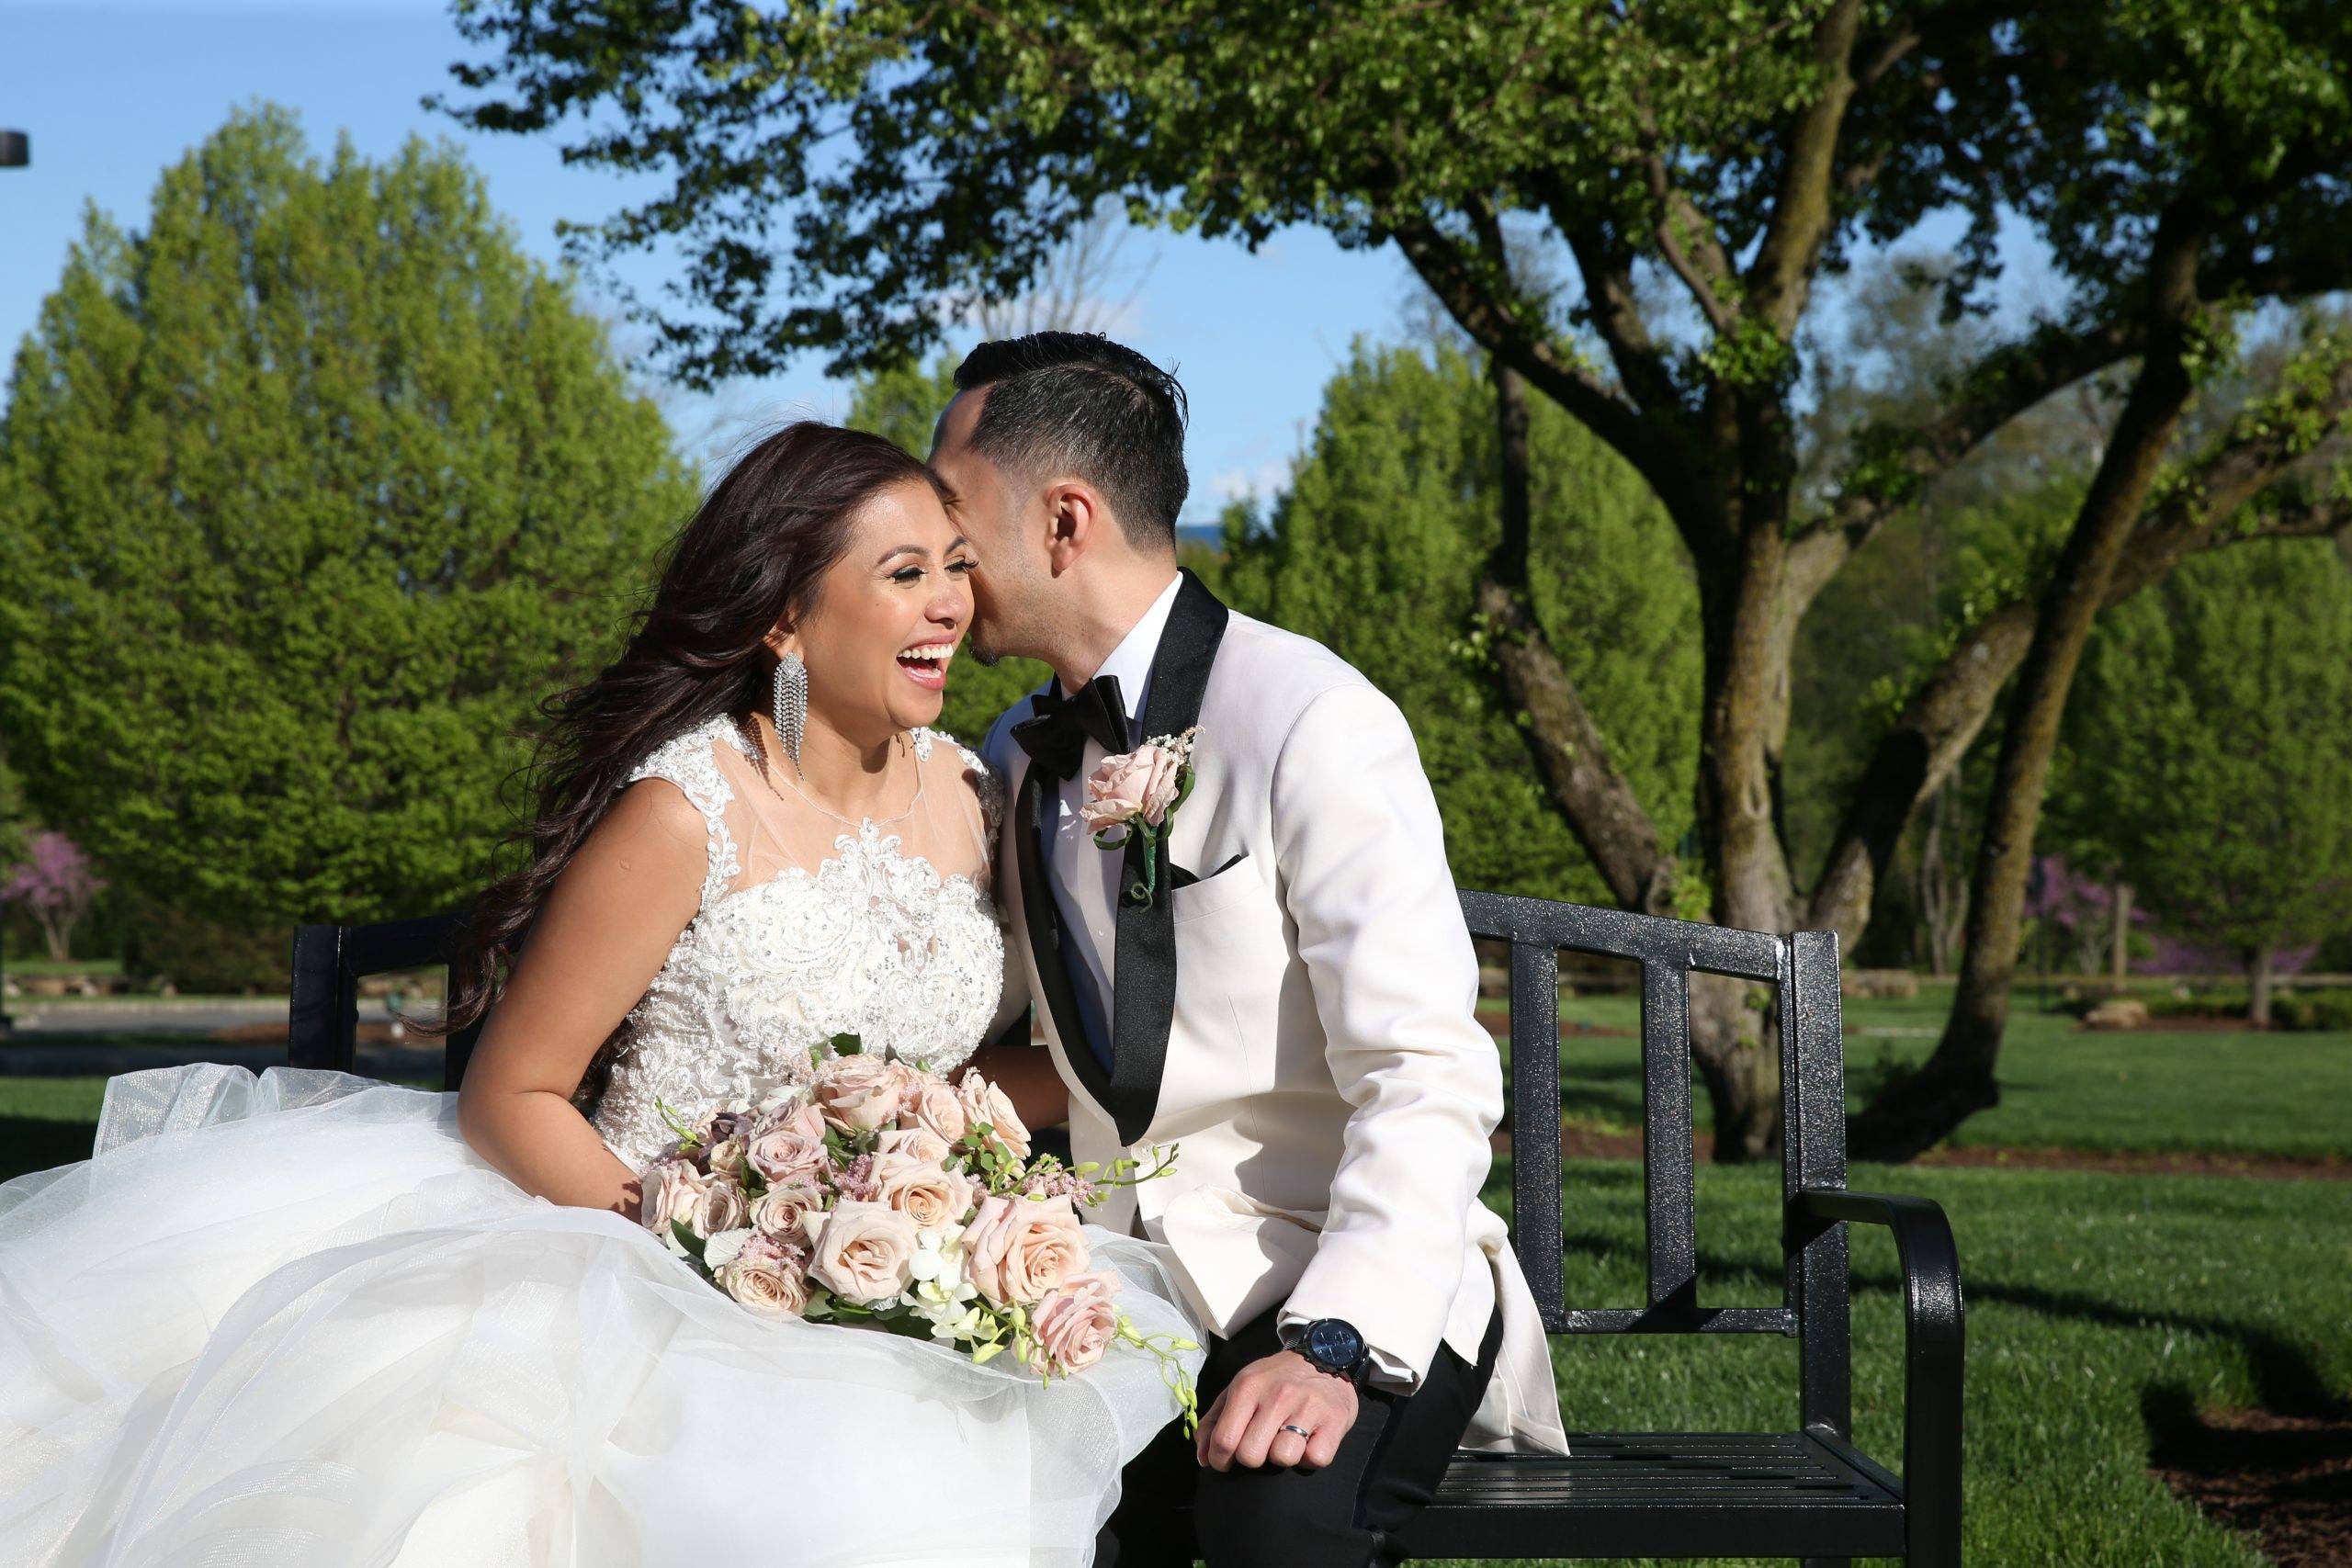 A bride and groom kissing on a bench in a park.